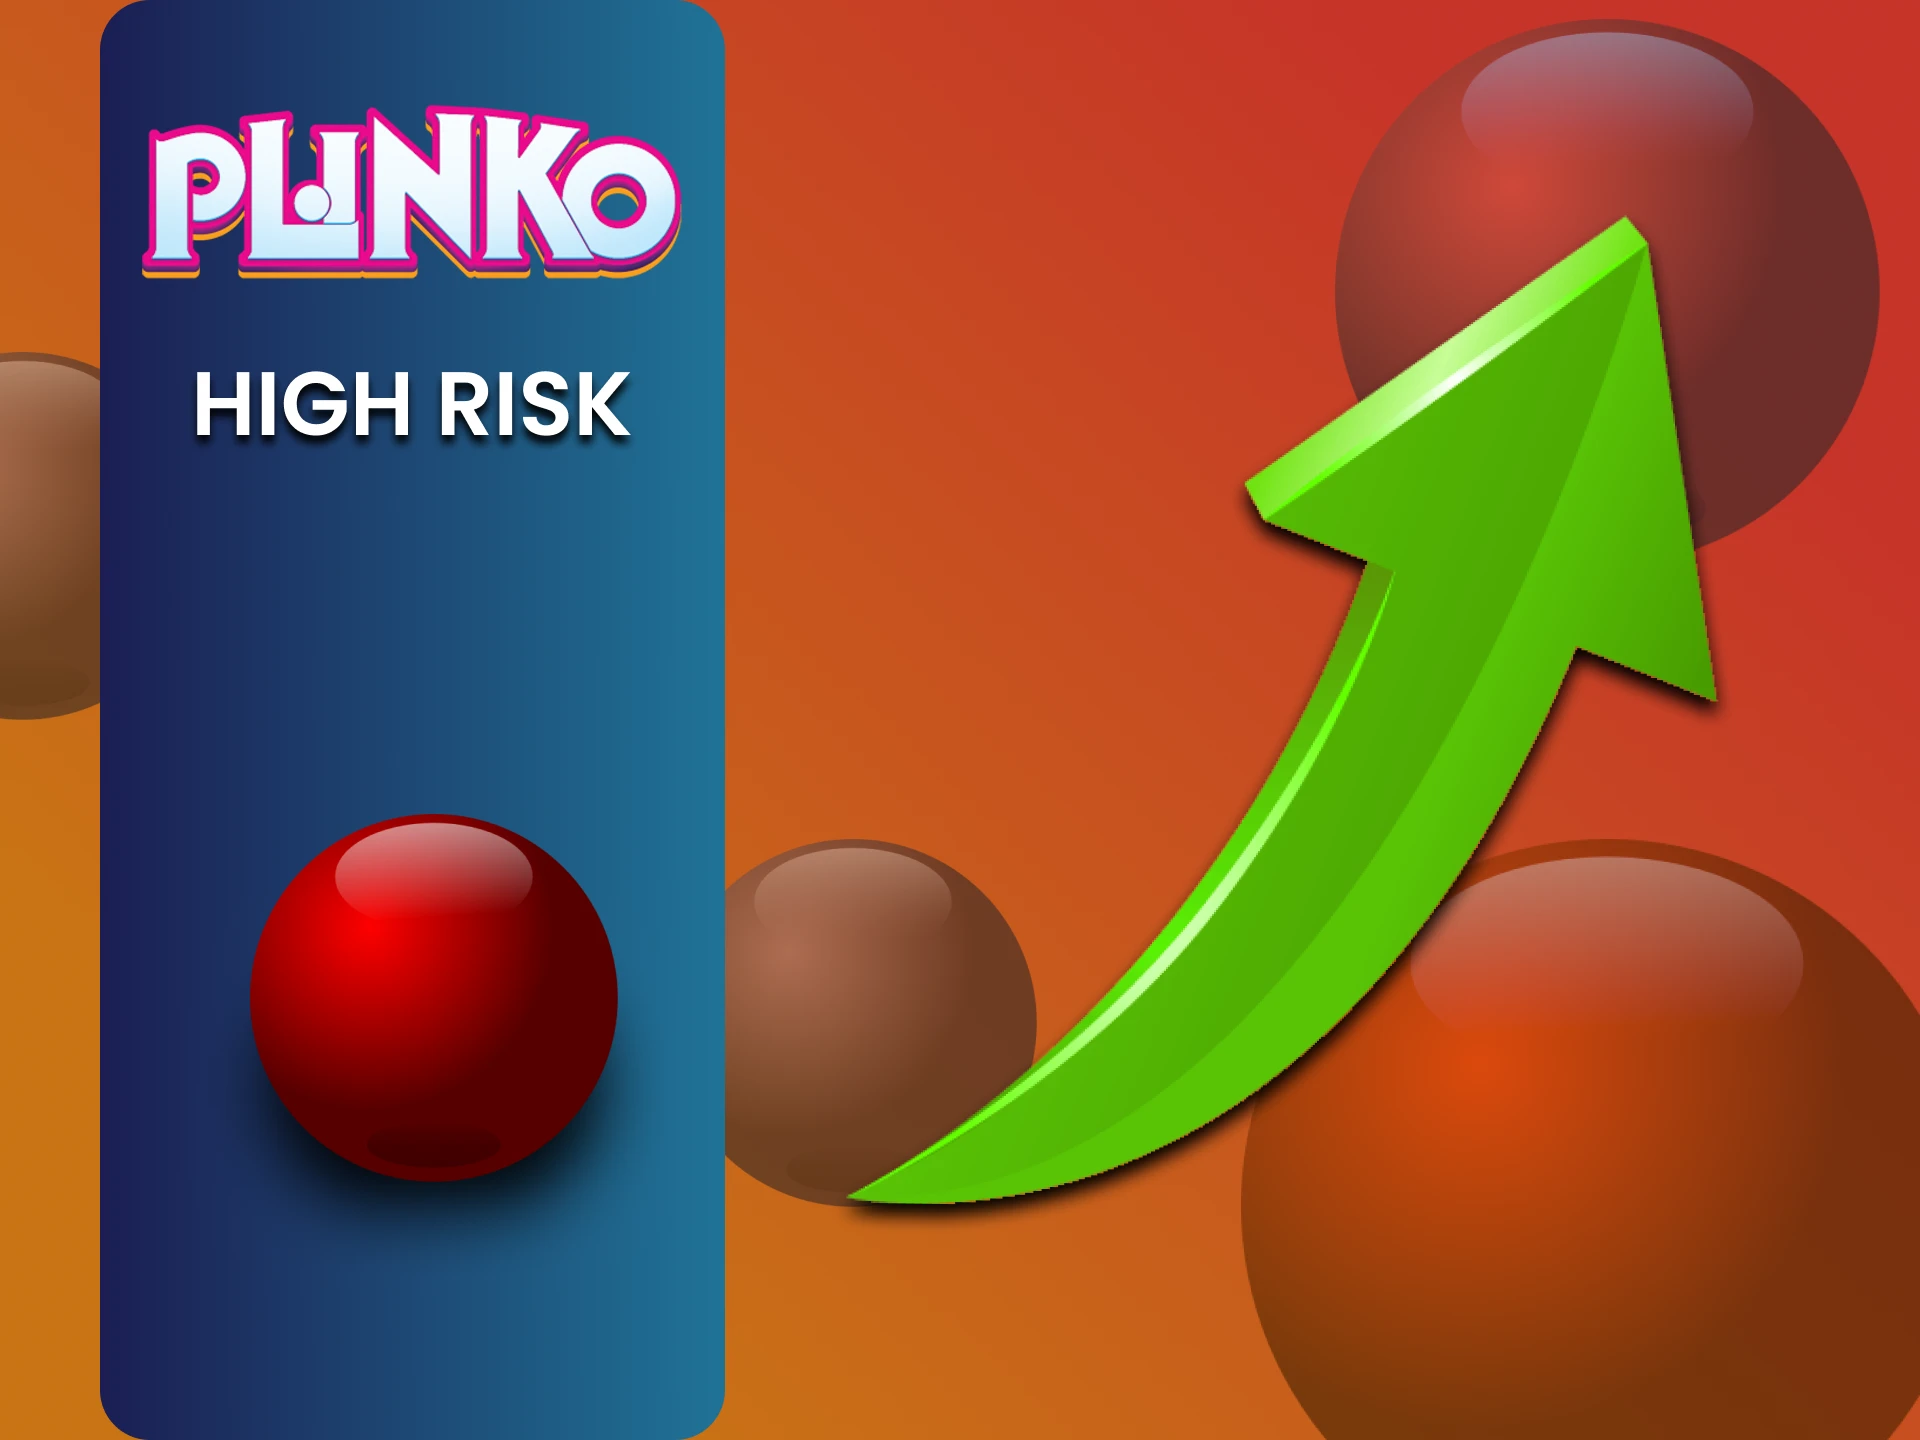 You can use high-risk tactics in Plinko.